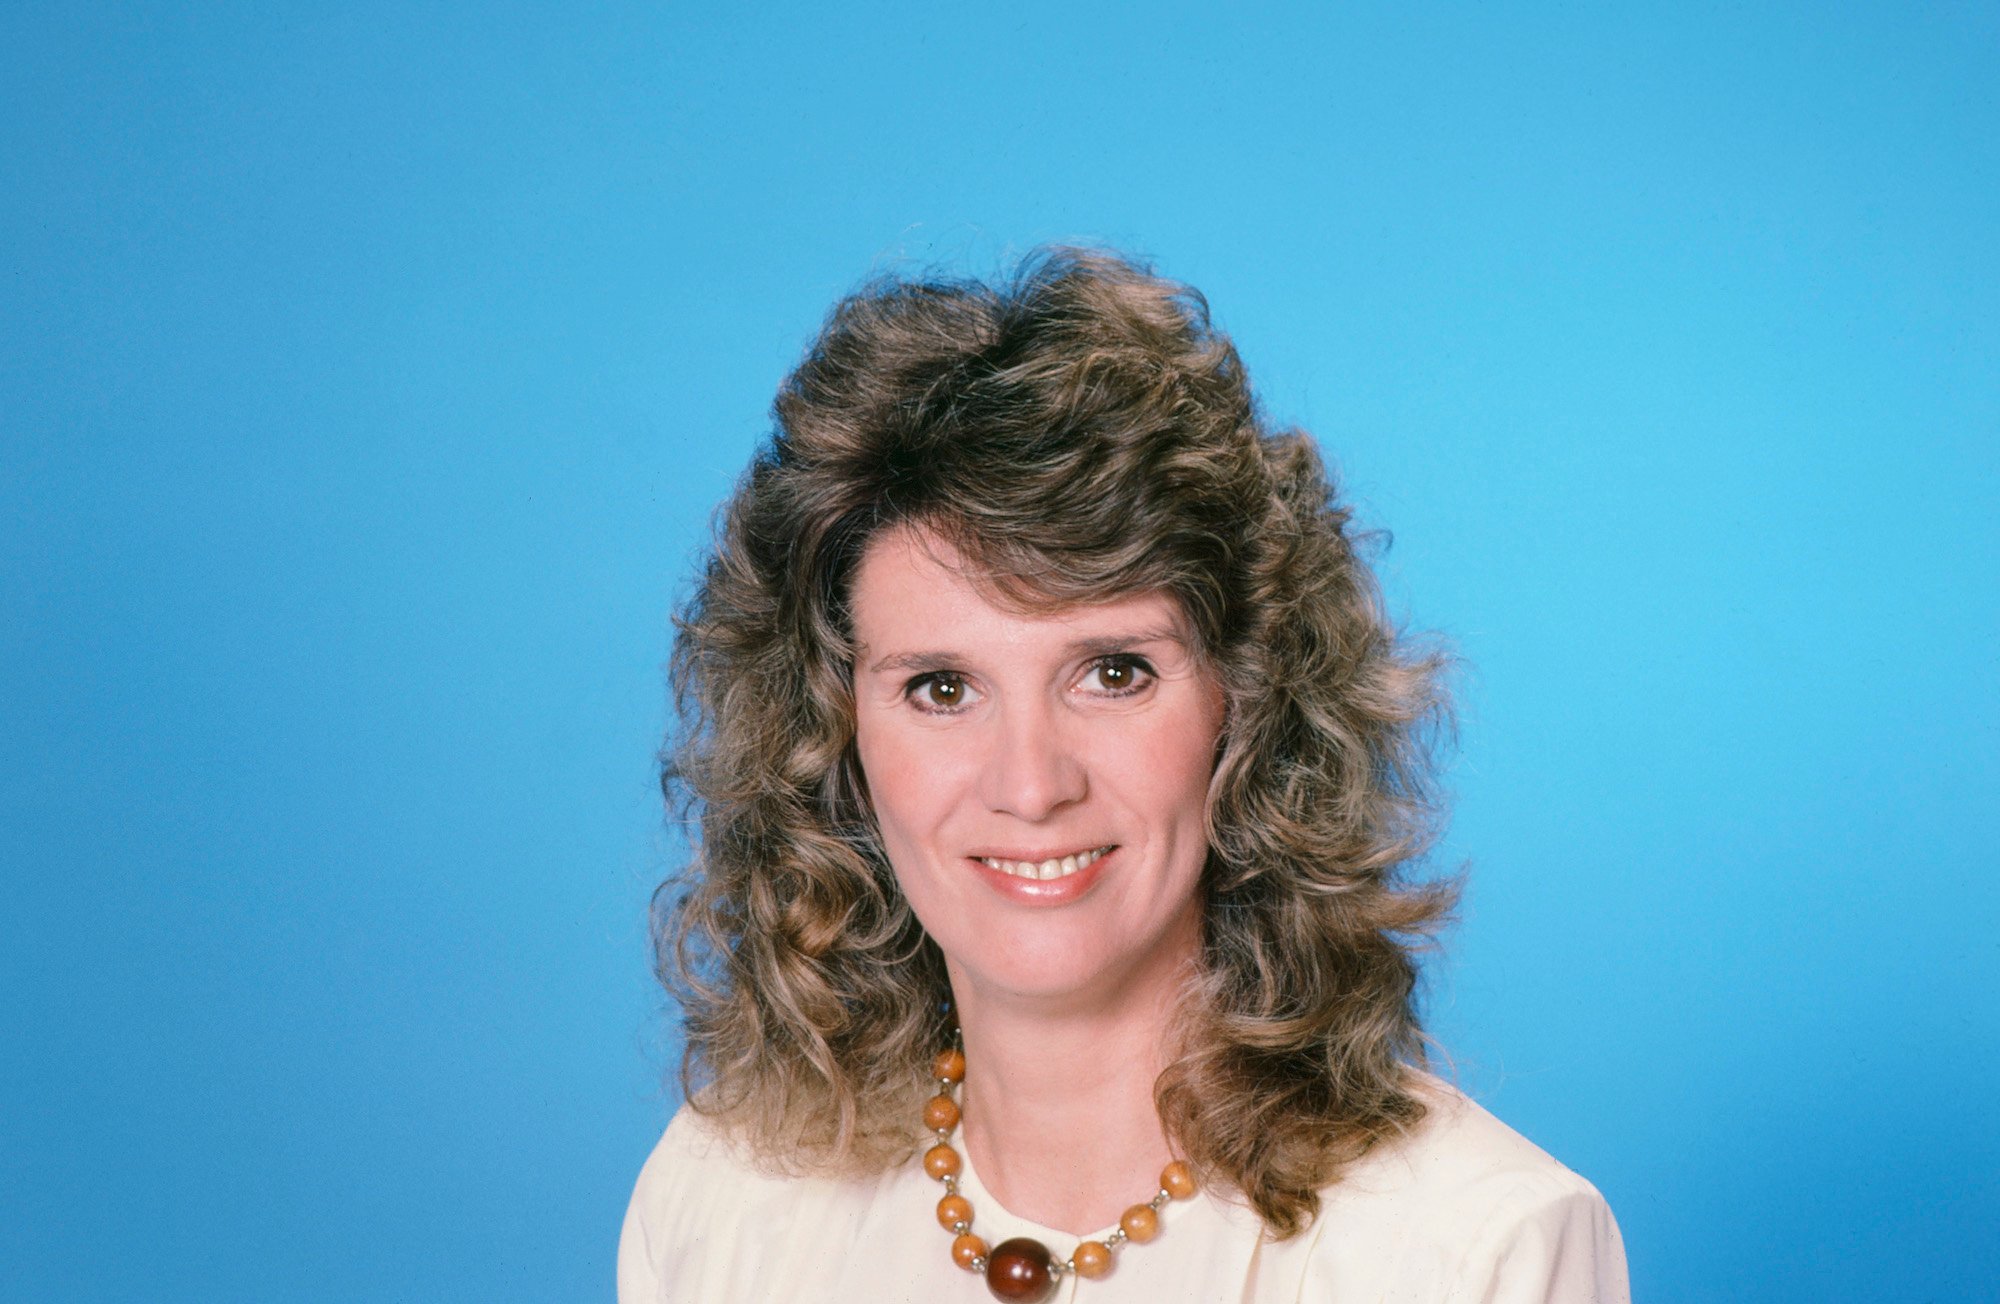 Barbara Bosson as Fay Furillo smiling in front of a bright blue background